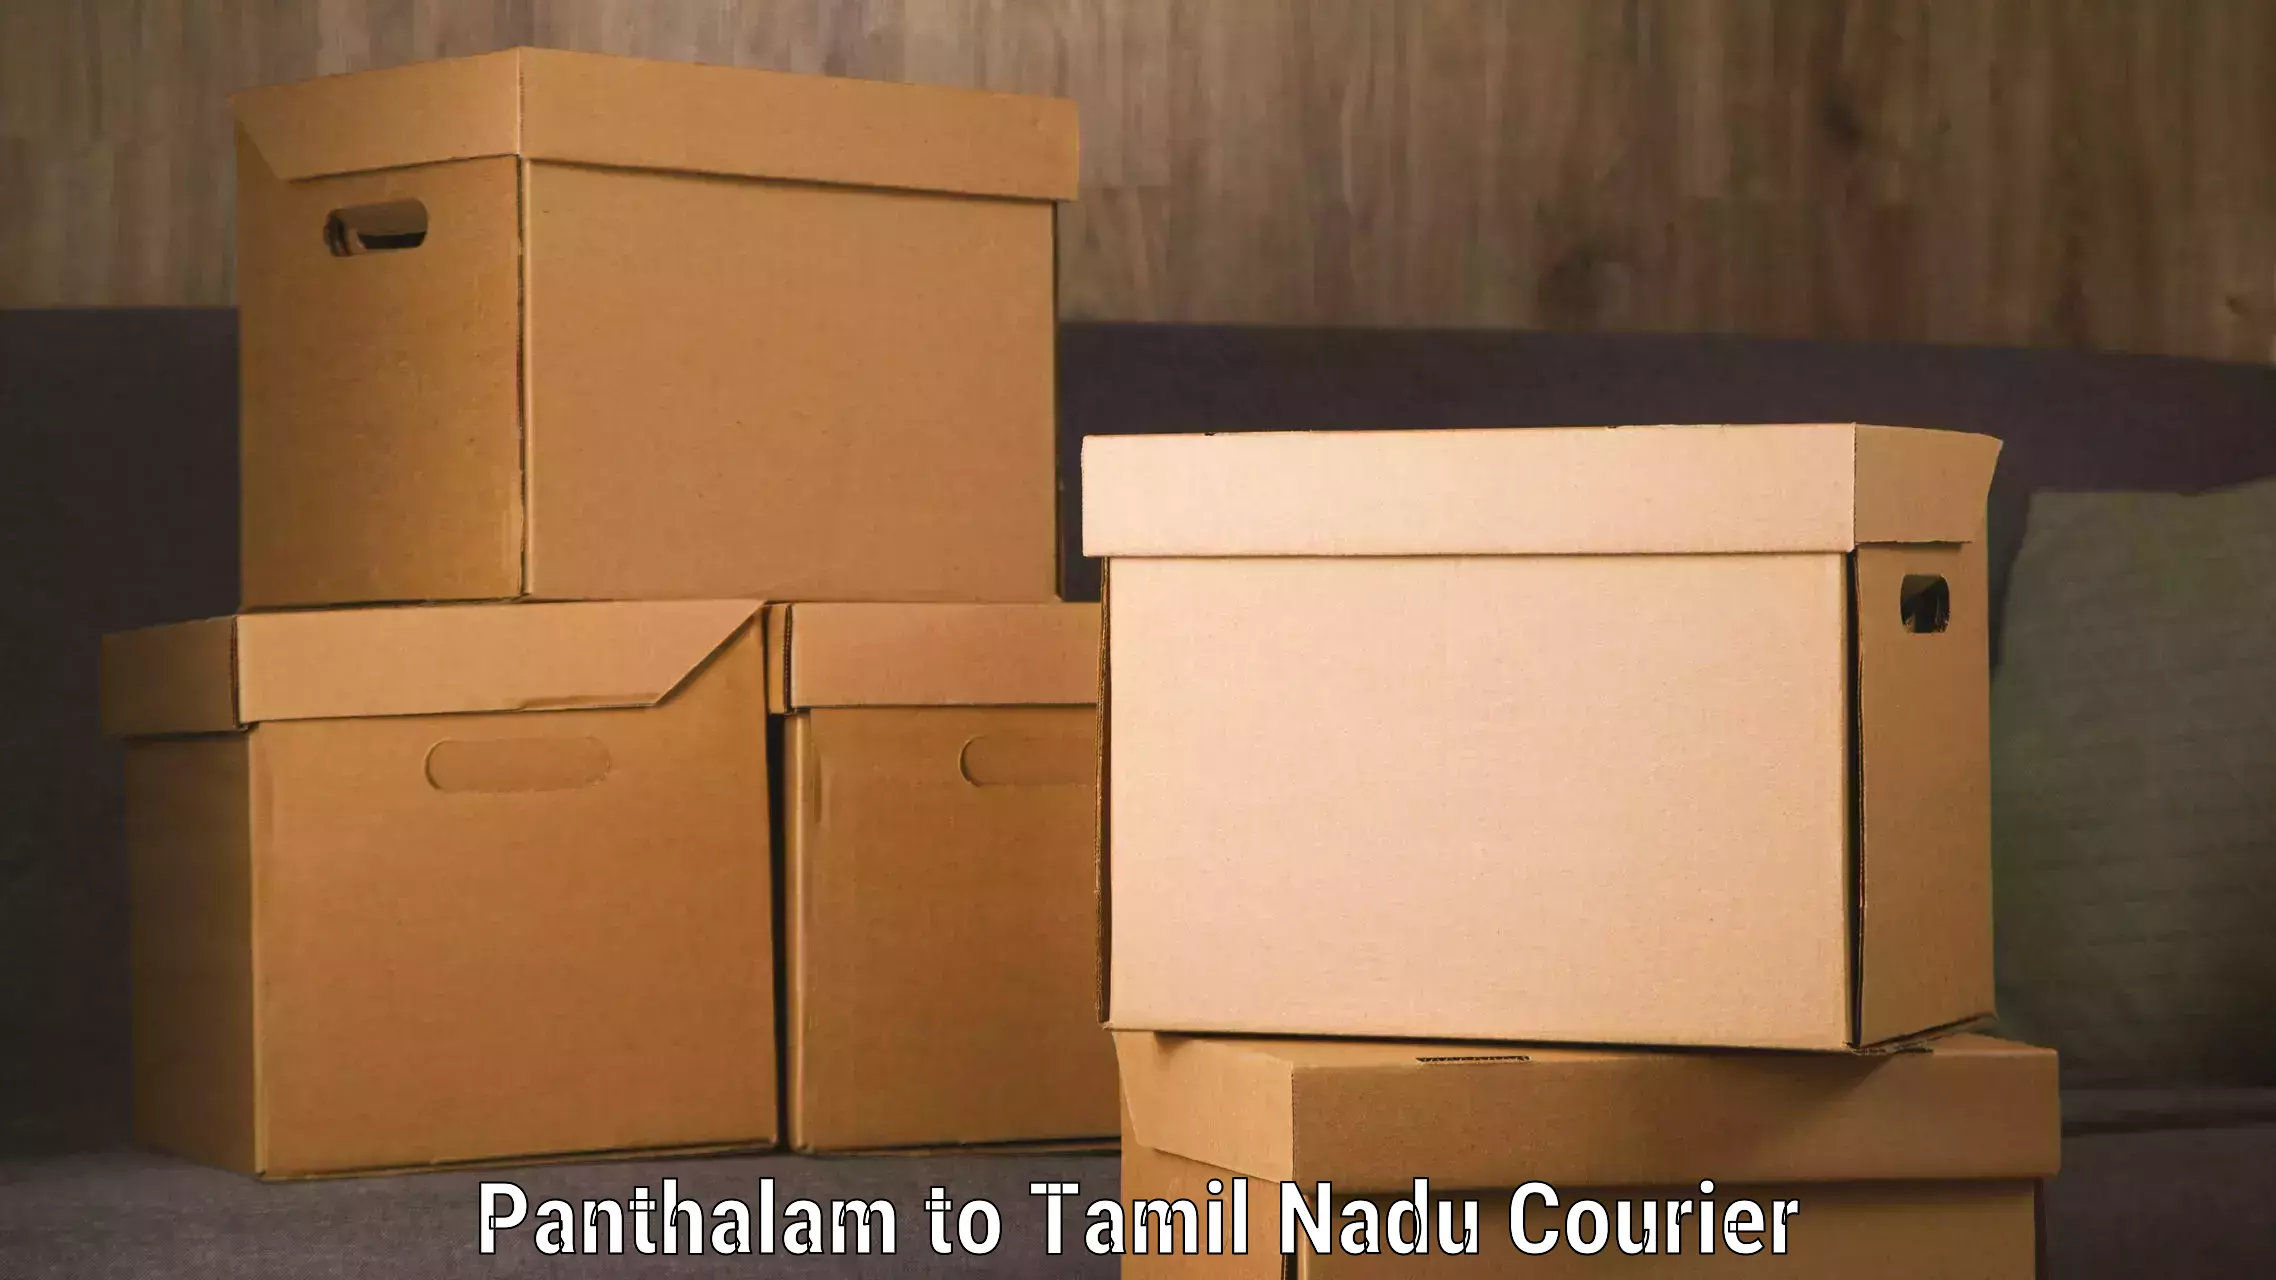 Sustainable shipping practices Panthalam to Tamil Nadu